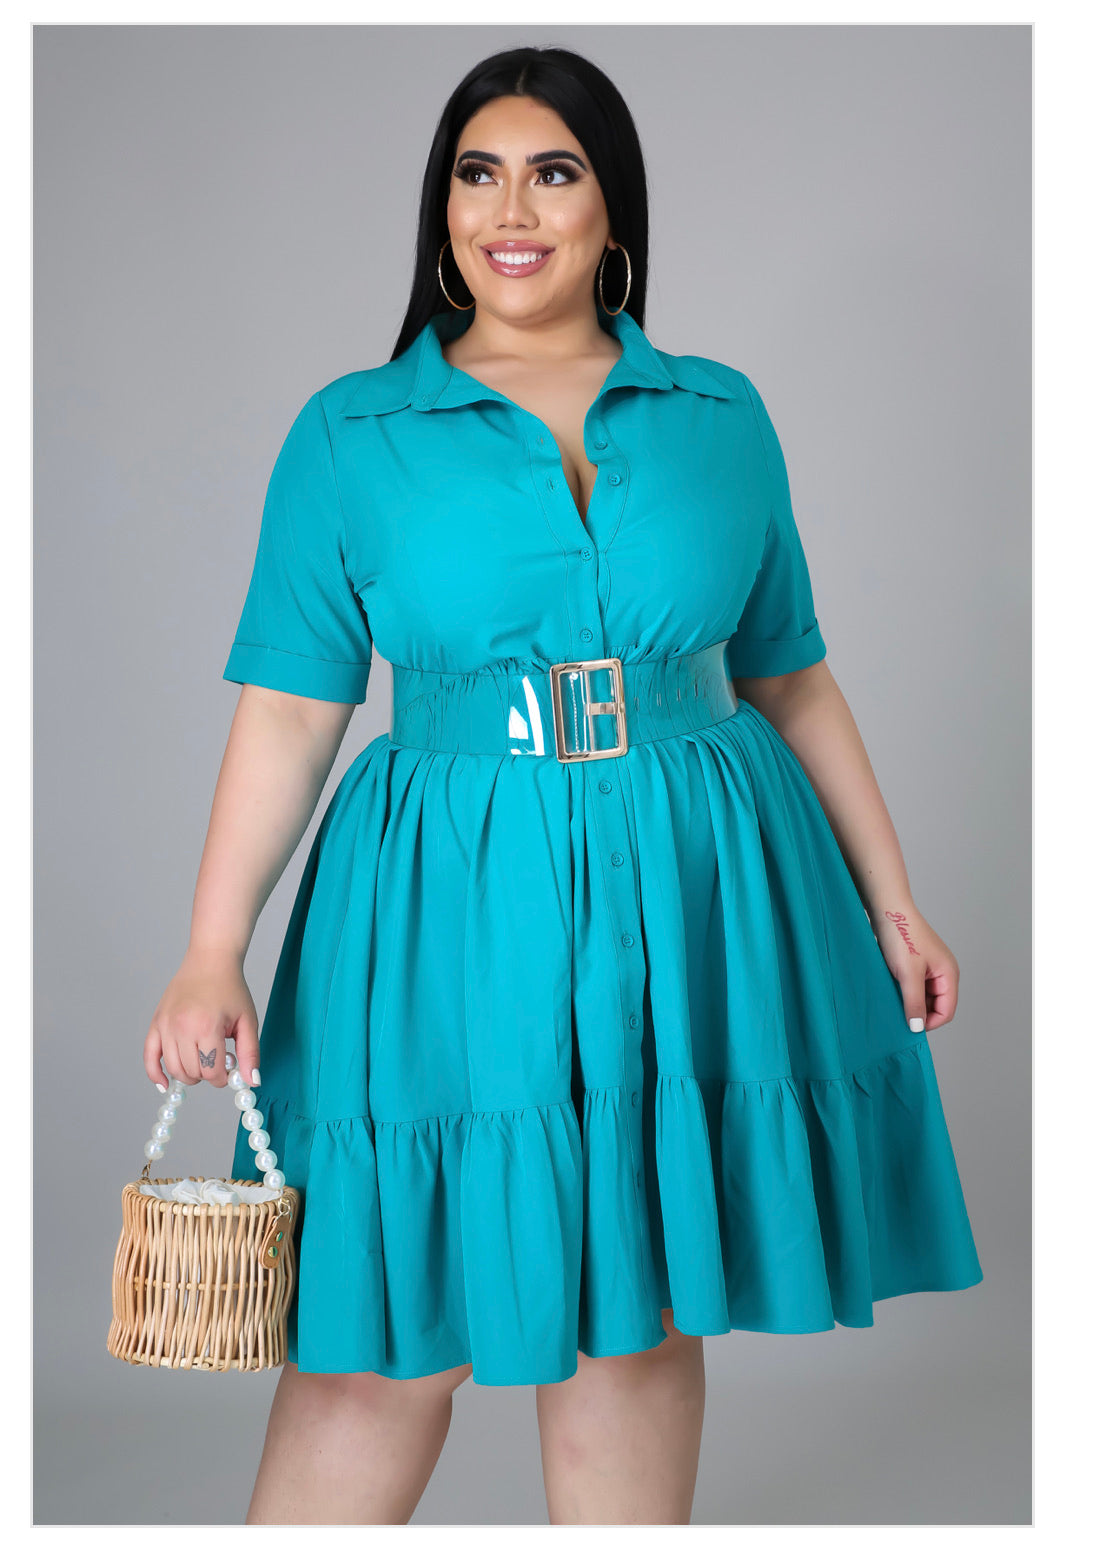 plus size dress. color is jade. button closure, collar at the neck, has sleeves. above the knee. 